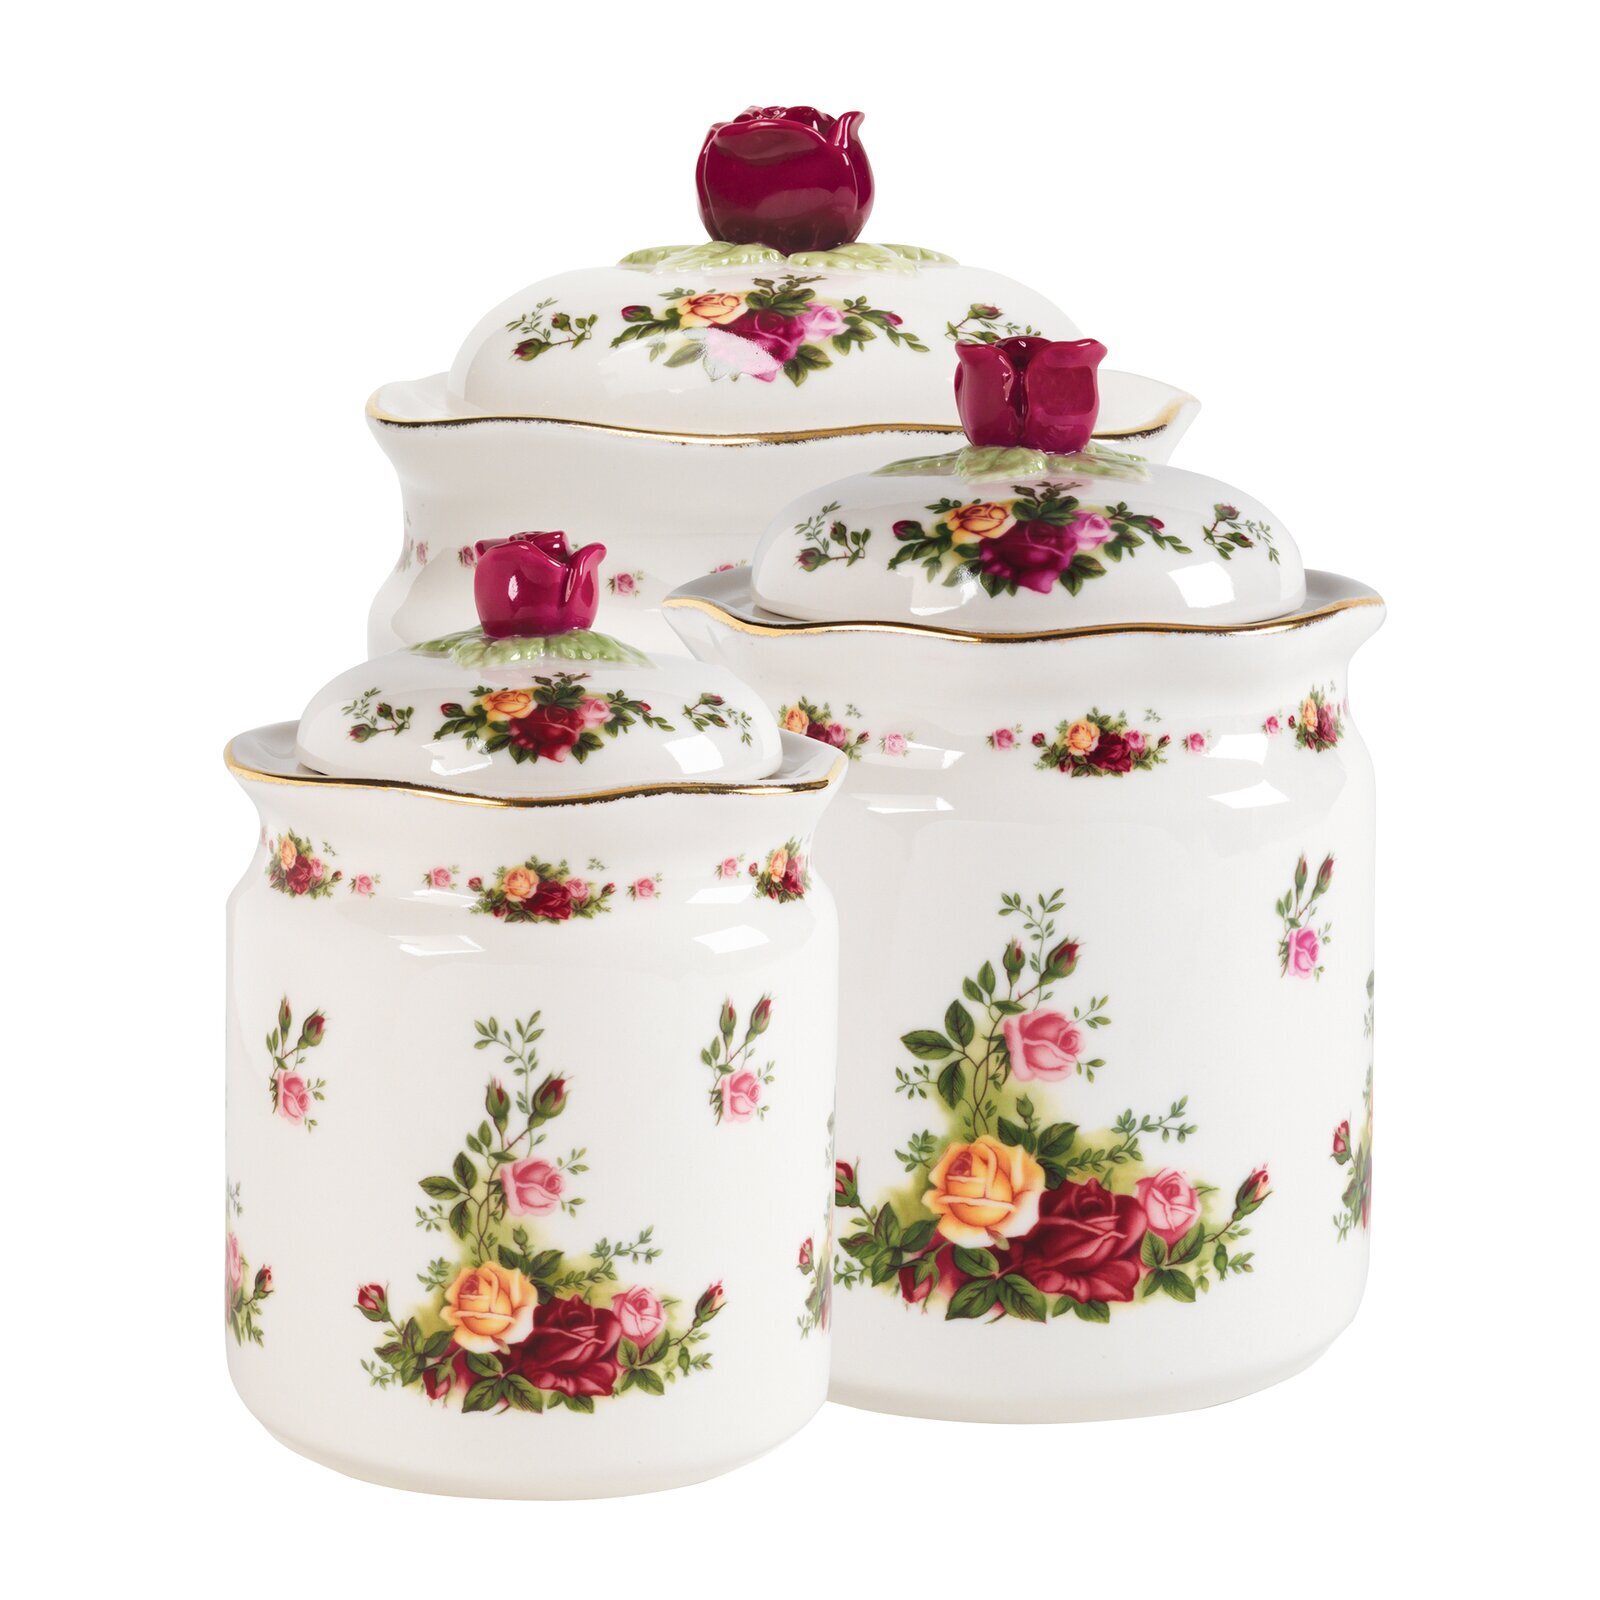 Cottagecore style country kitchen canisters